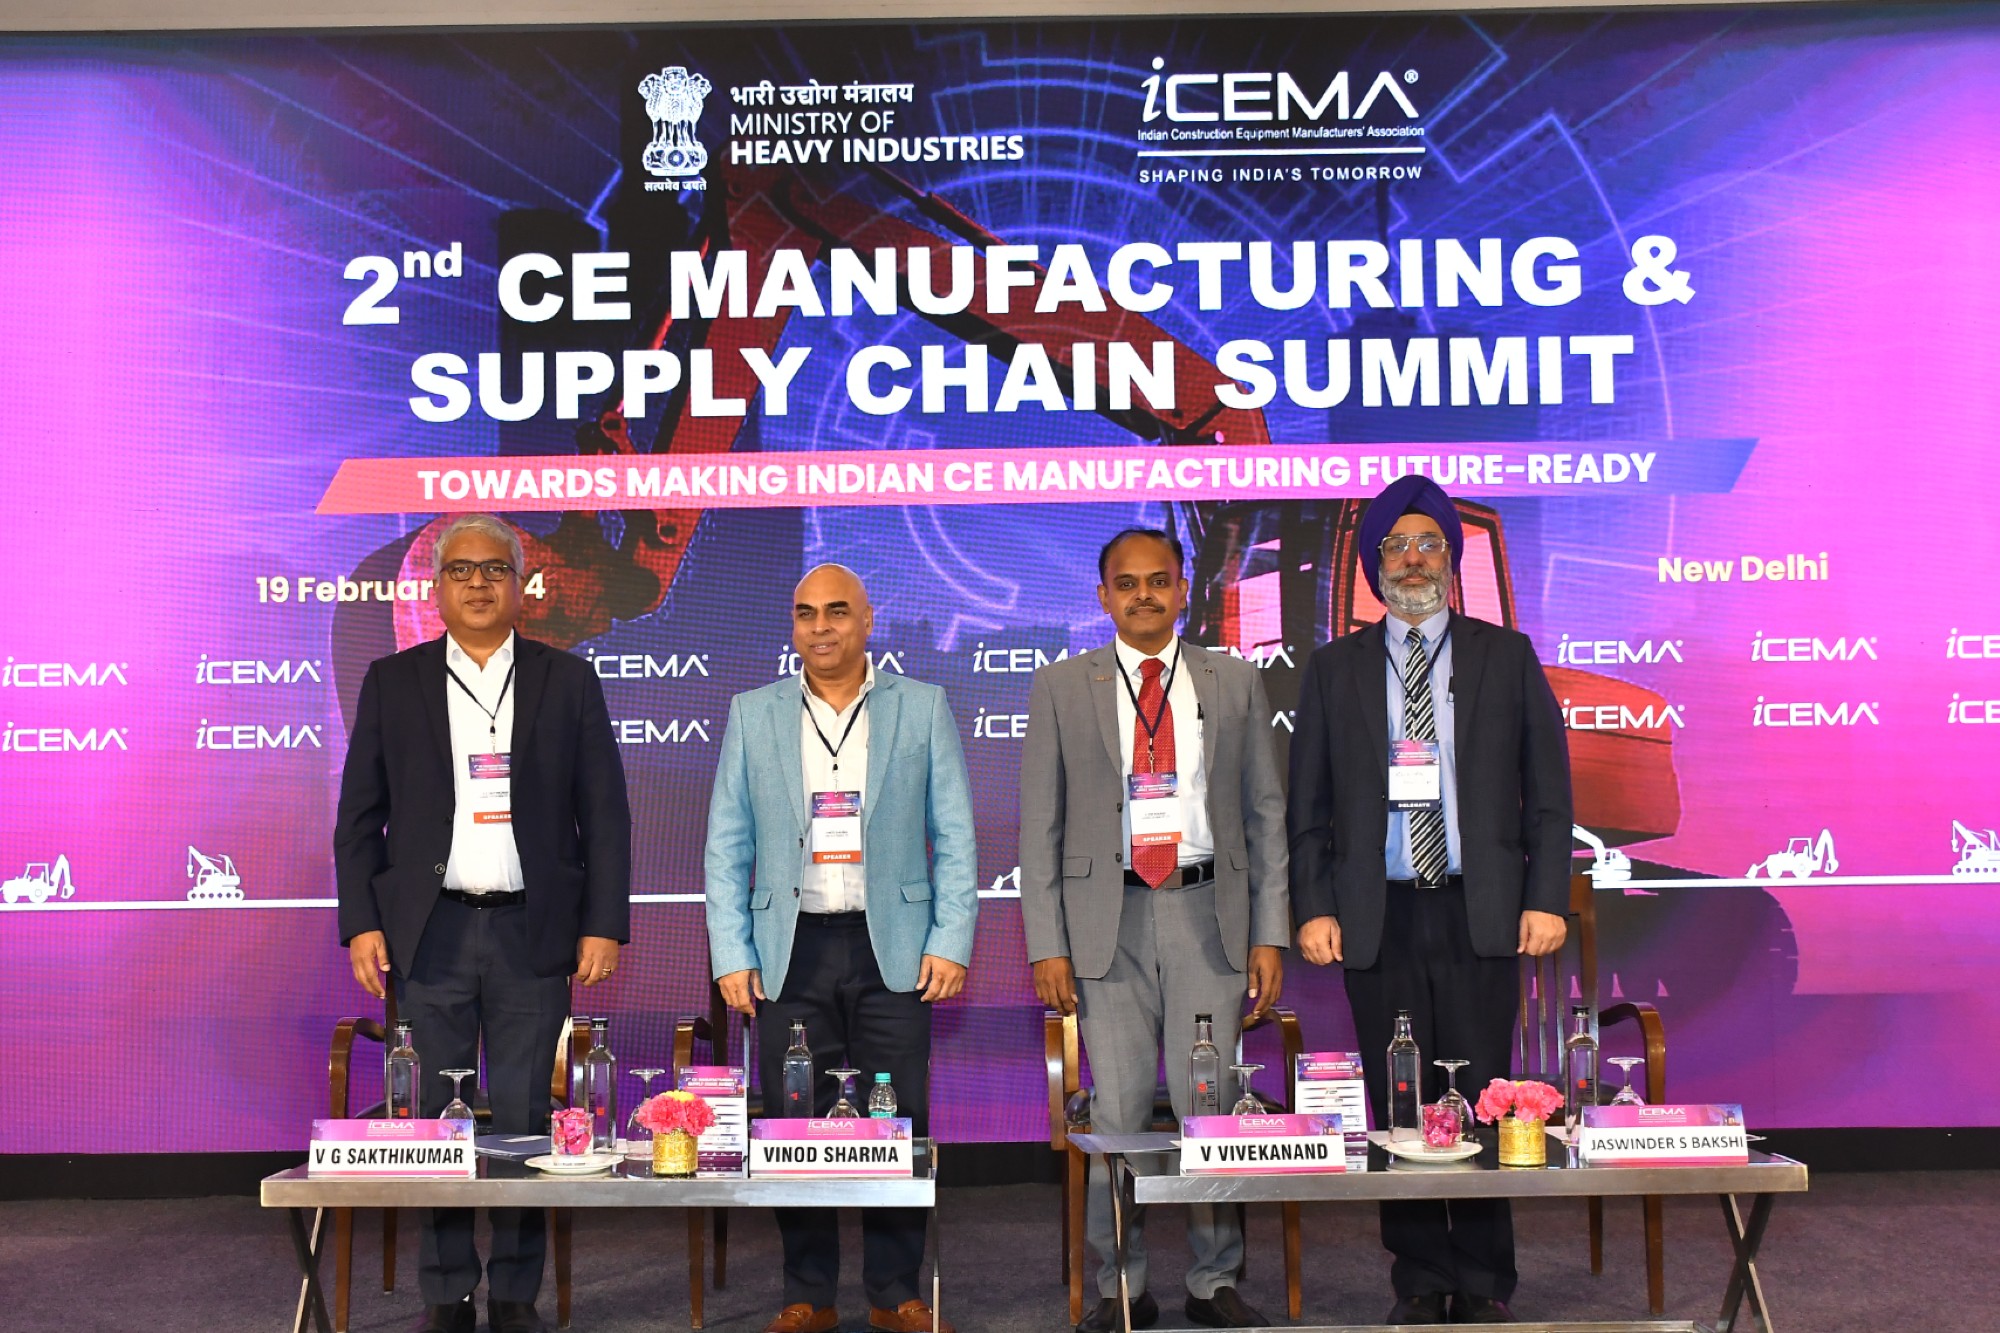 ICEMA summit sparks vision for future-ready manufacturing and supply chains